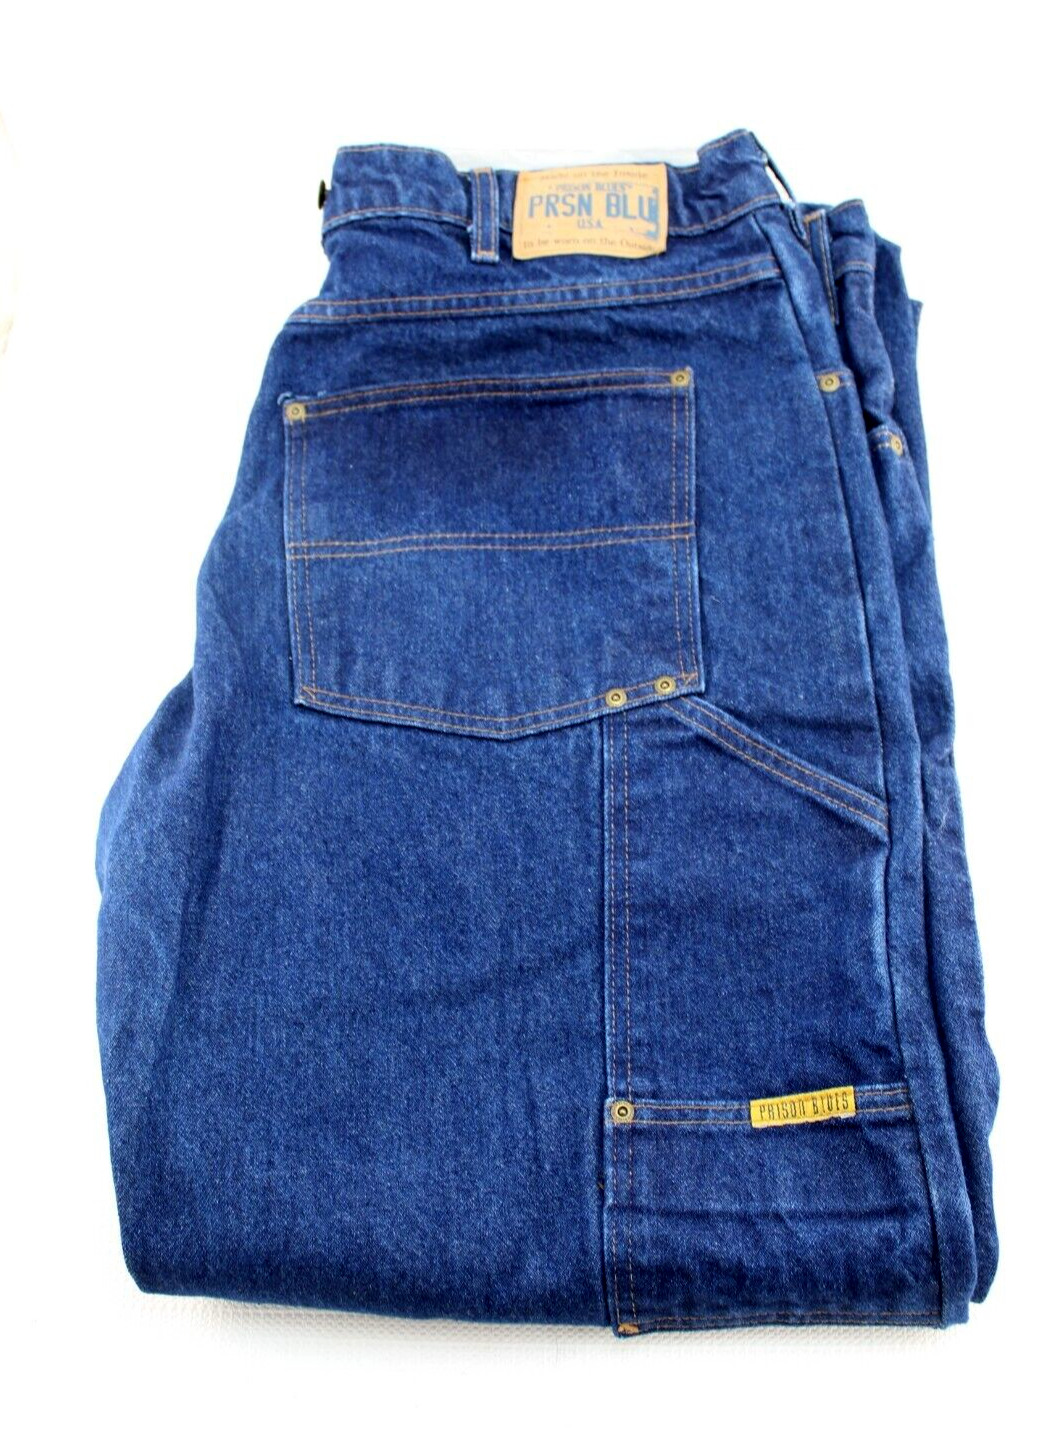 Prison blues jeans, a ubiquitous item in modern fashion, have transcended time and culture to become an enduring symbol of casual wear across